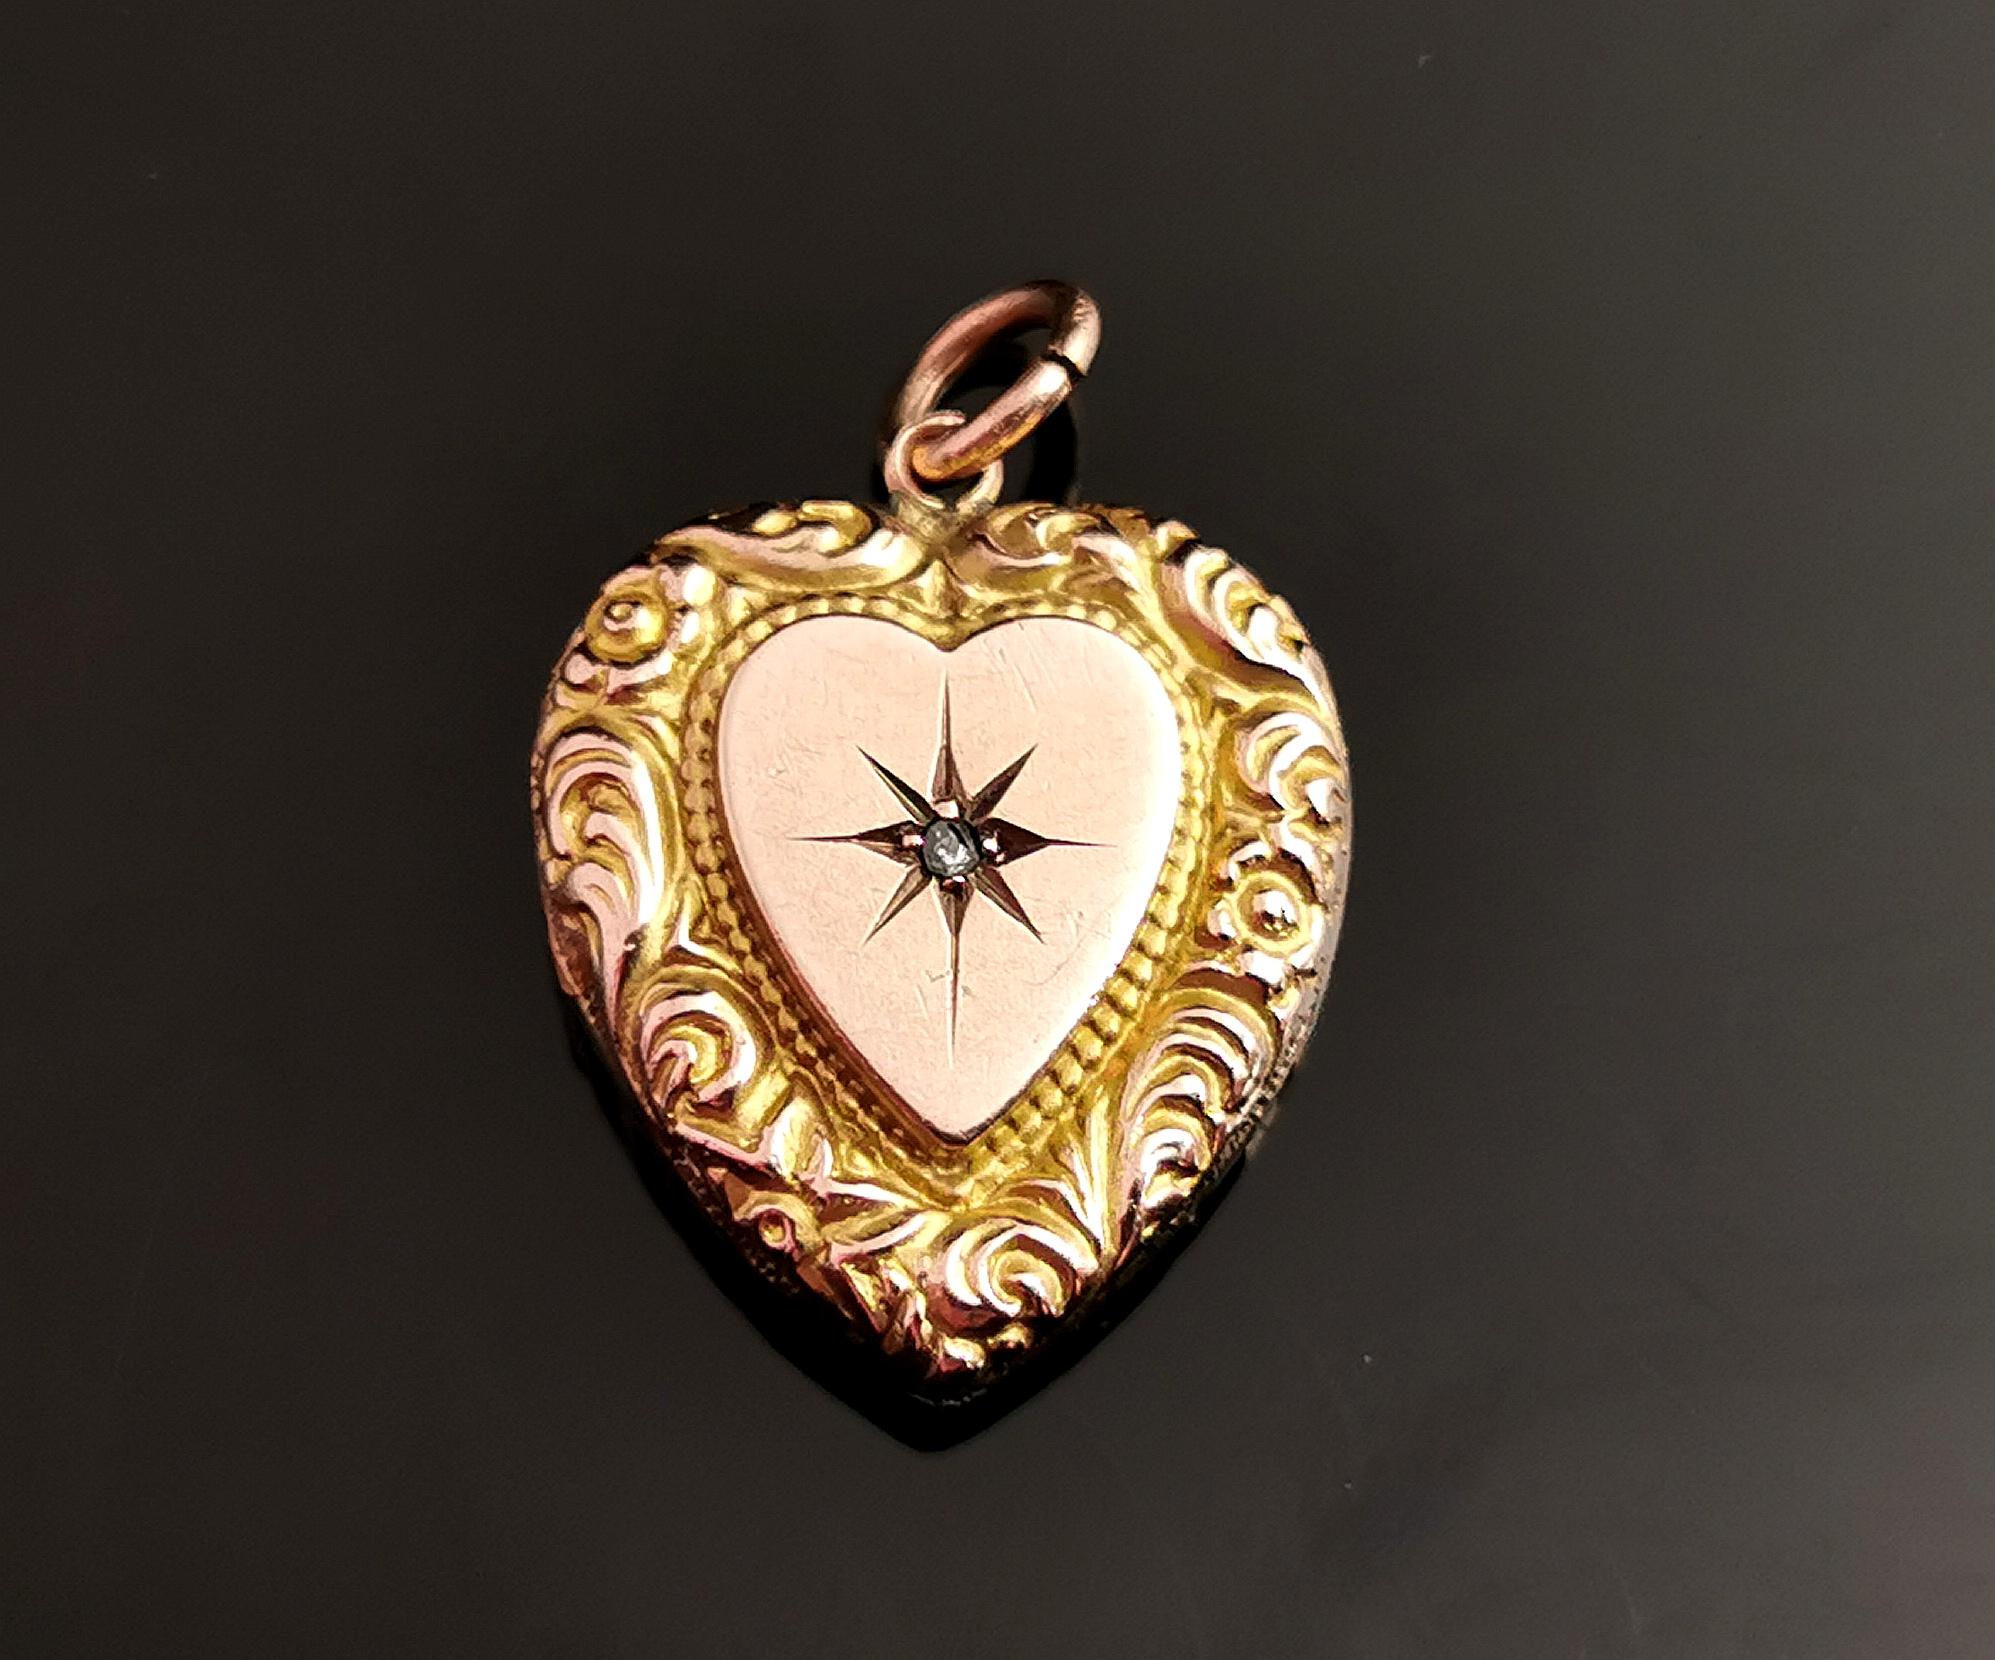 A sweet little antique diamond heart pendant.

It is a hollow puffy style heart with heavy engraved borders and a smooth polished centre, the centre of the heart features a single gypsy it star set, rose cut diamond.

It has a locket back, currently